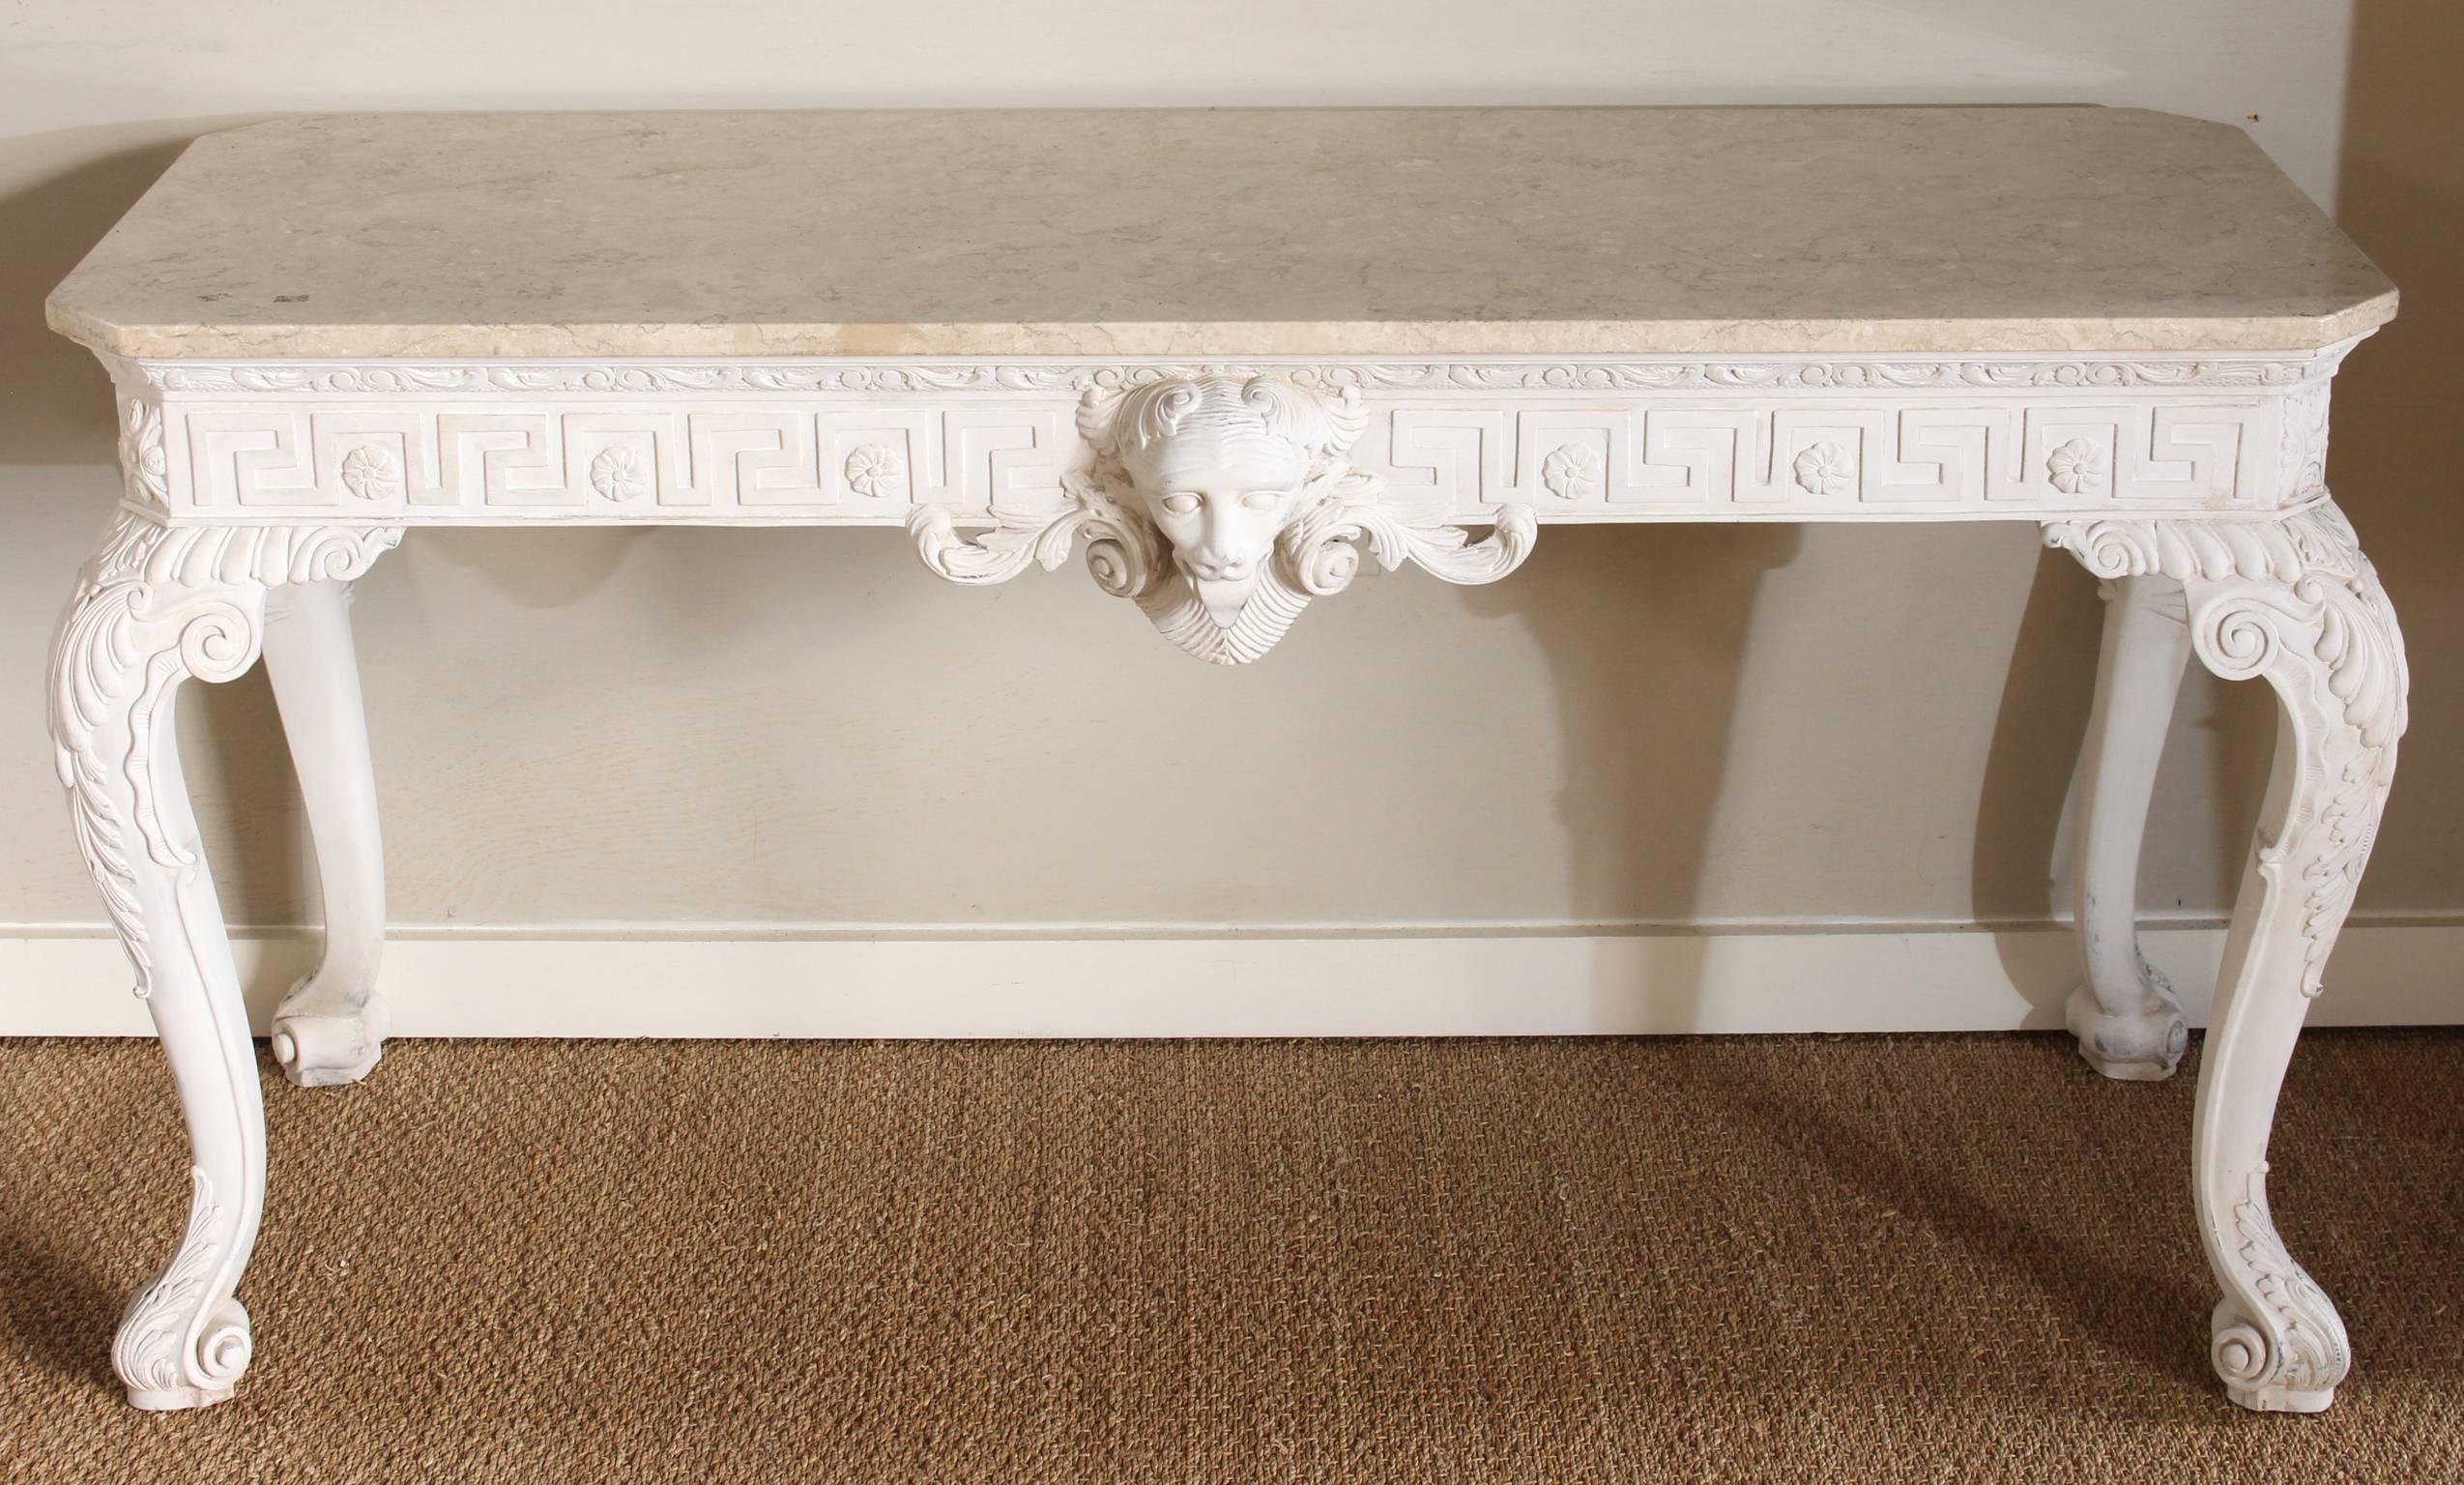 A beautifully carved and painted George III style console table with a mellow, pale cream colored marble top. The Greek key carved apron on all four sides accented with large lion's head on the front. Carved acanthus leaf decorated cabriole legs